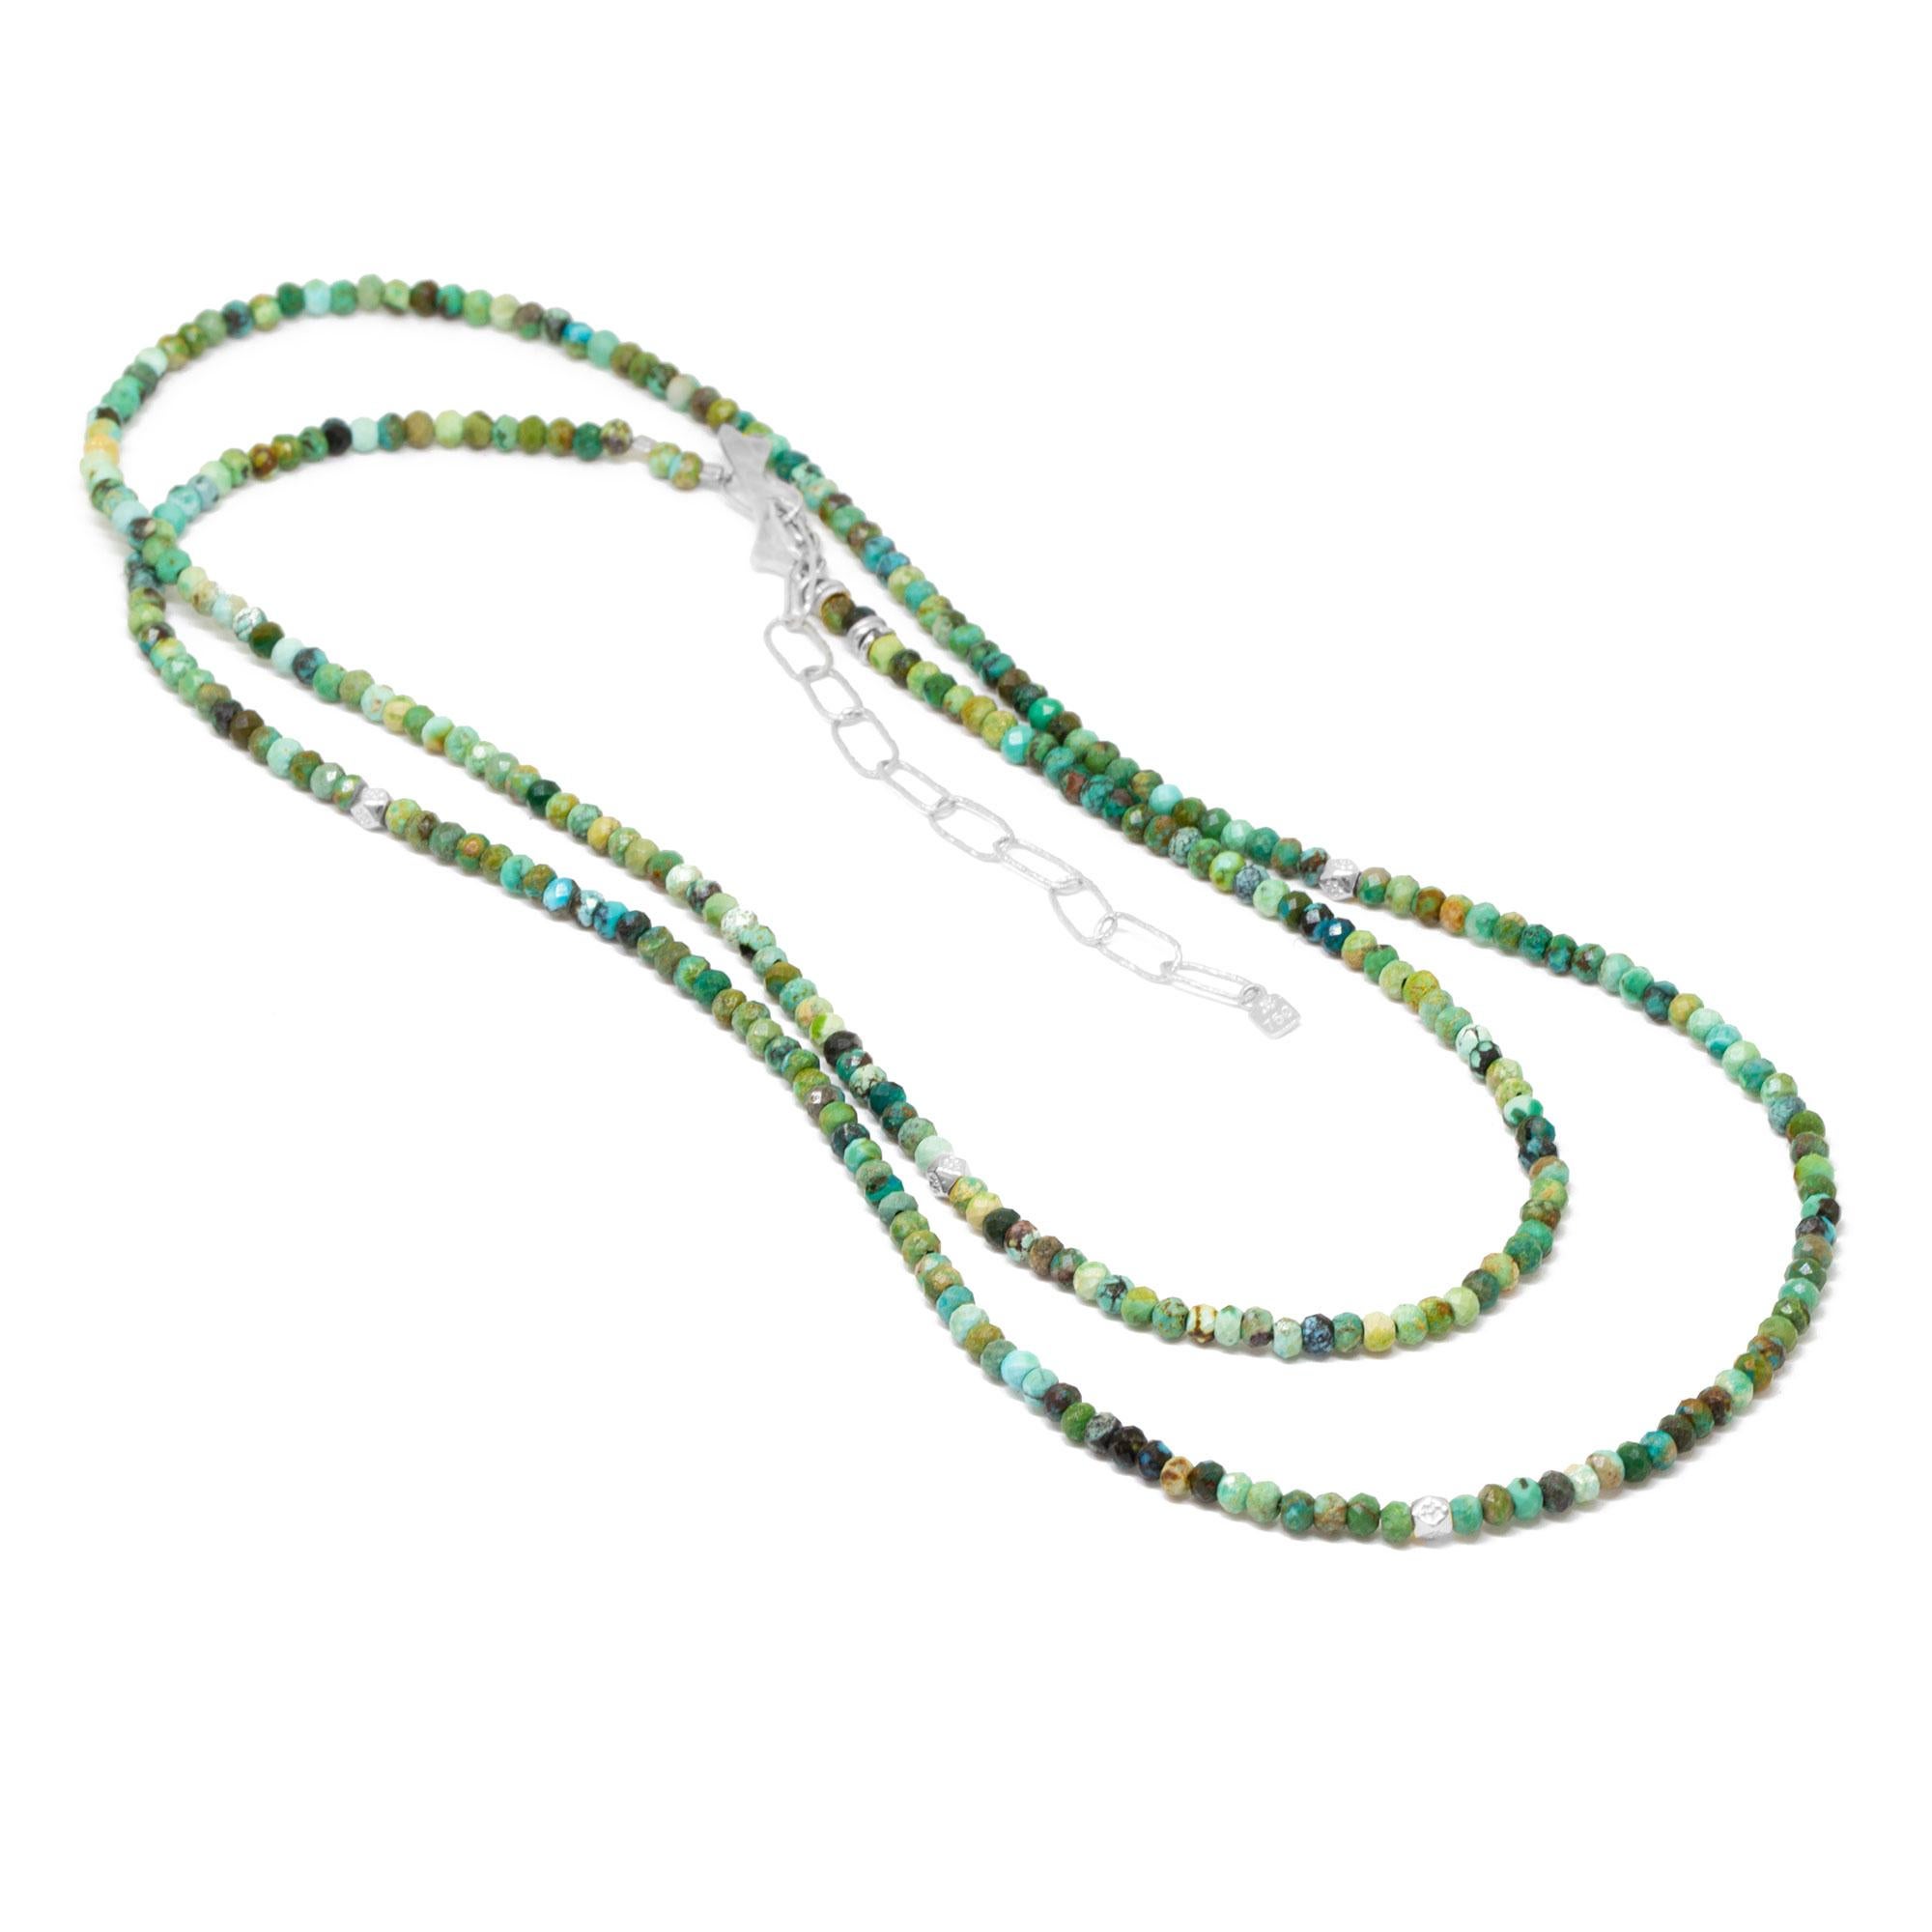 The best part about our Chloe Silver Gemstone Convertable Wrap isn’t just that it can be worn long, doubled-up, or as a wrap bracelet (although that’s pretty cool). It’s that you can thread any of our Charms onto the turquoise beads—have fun playing